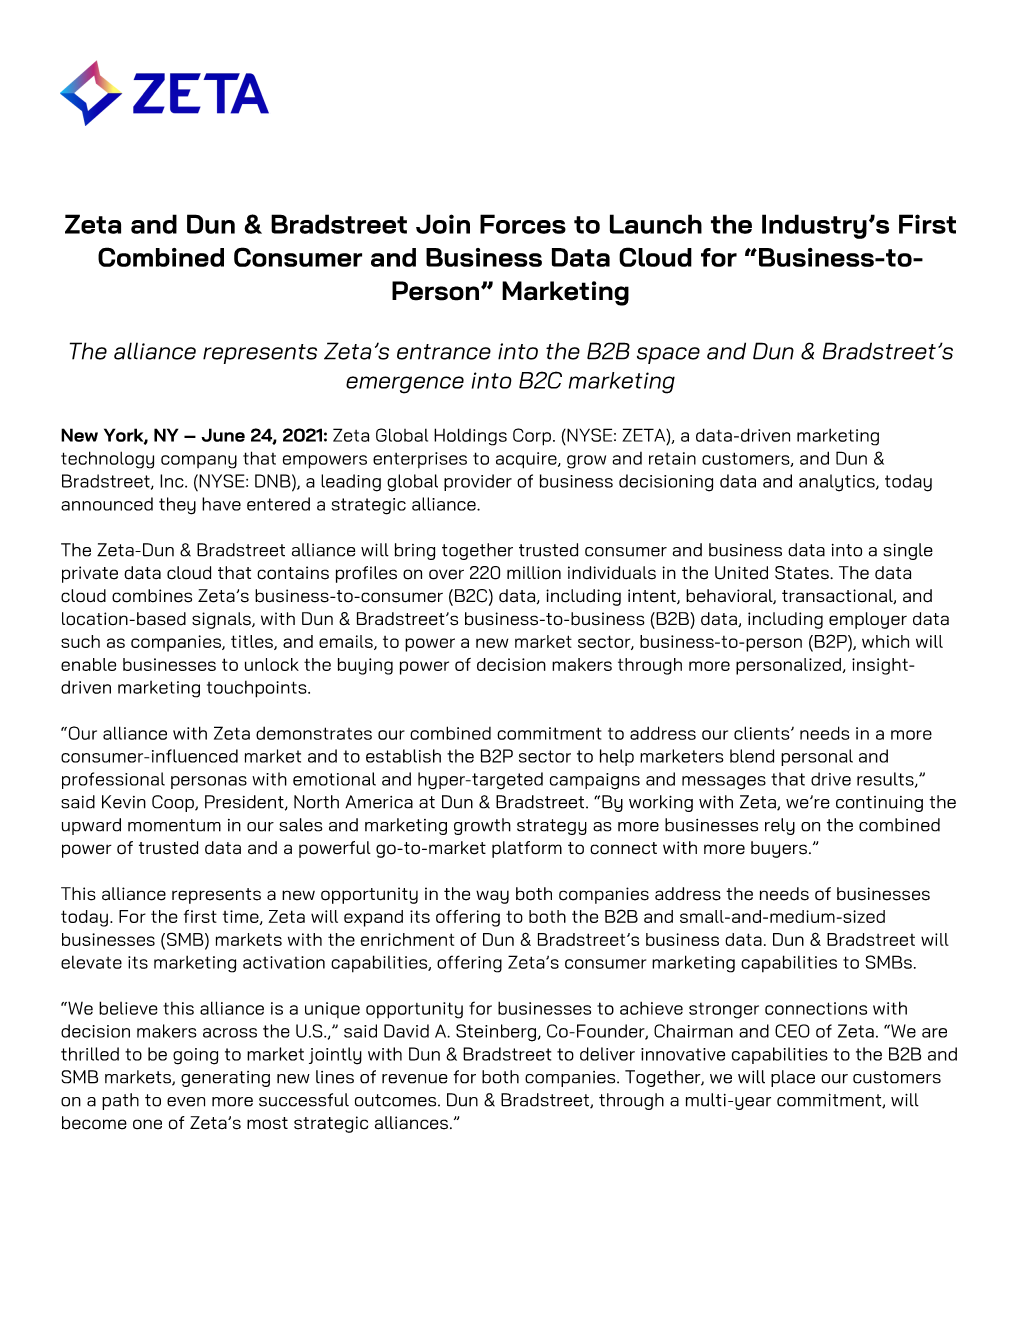 Zeta and Dun & Bradstreet Join Forces to Launch the Industry's First